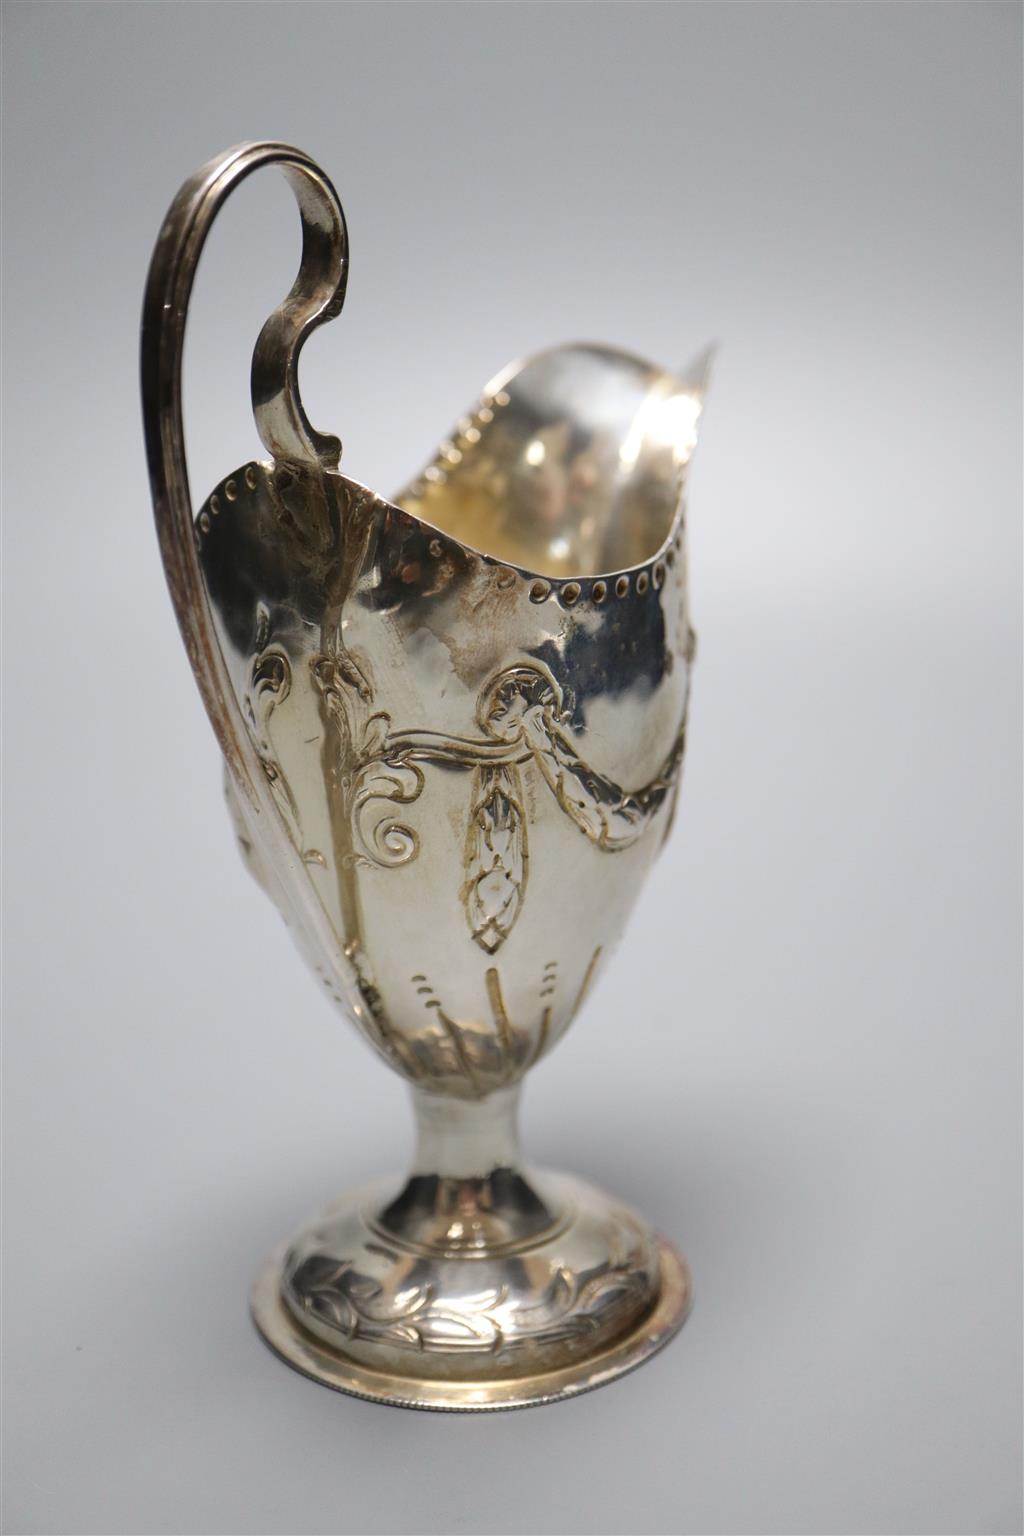 A George III silver helmet shaped cream jug, with later embossed decoration, London, 1773, 14cm, 88 grams (a.f.).